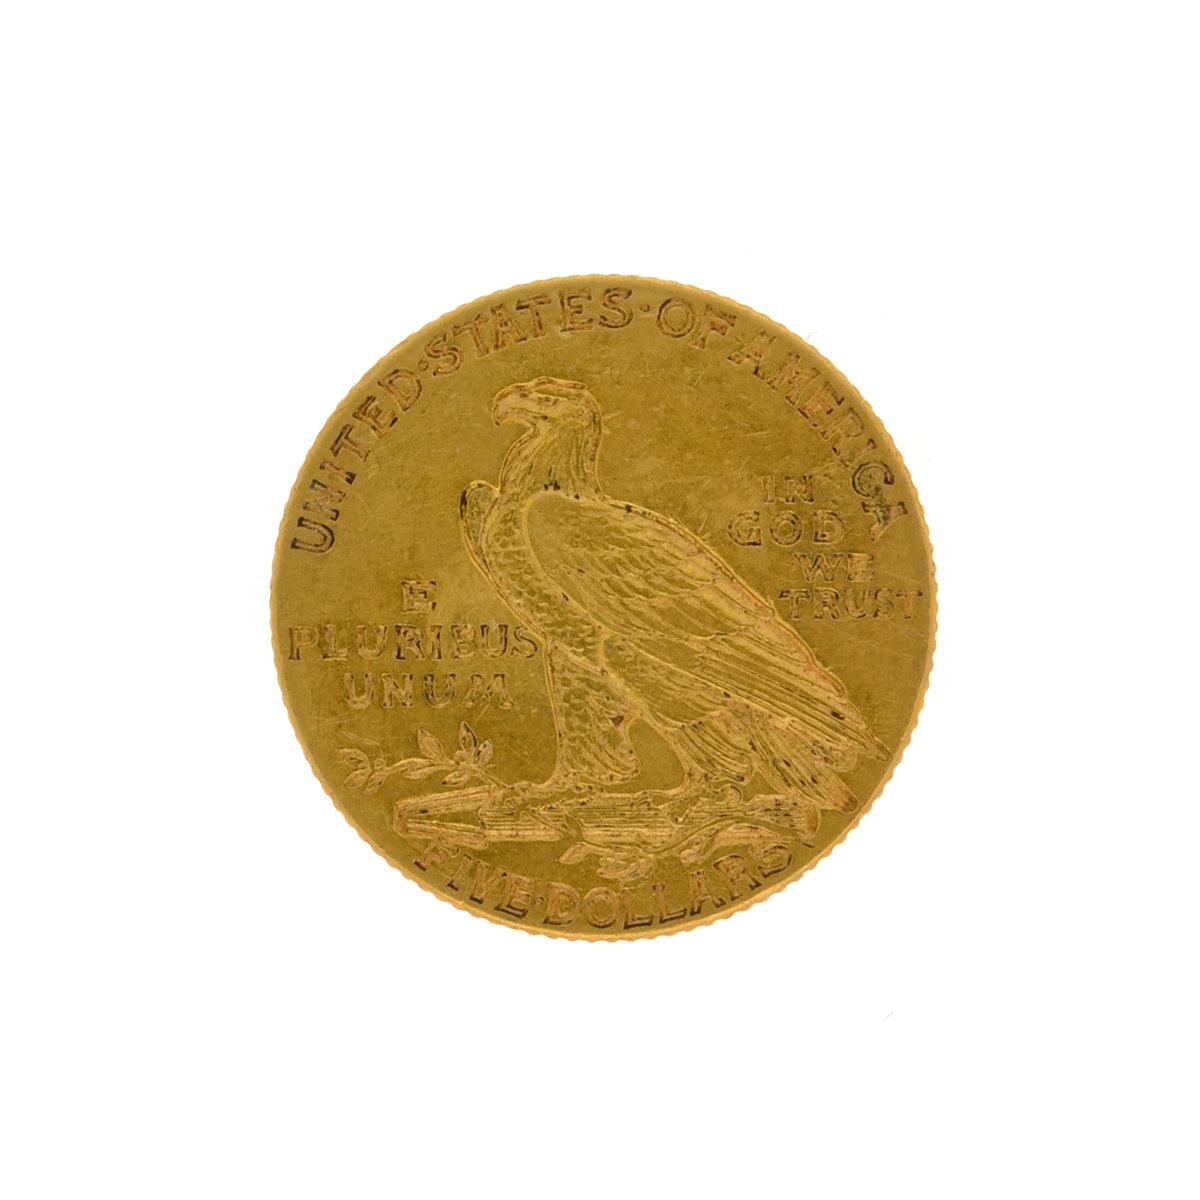 *1914-S $5 Indian Head Gold Coin (DF)